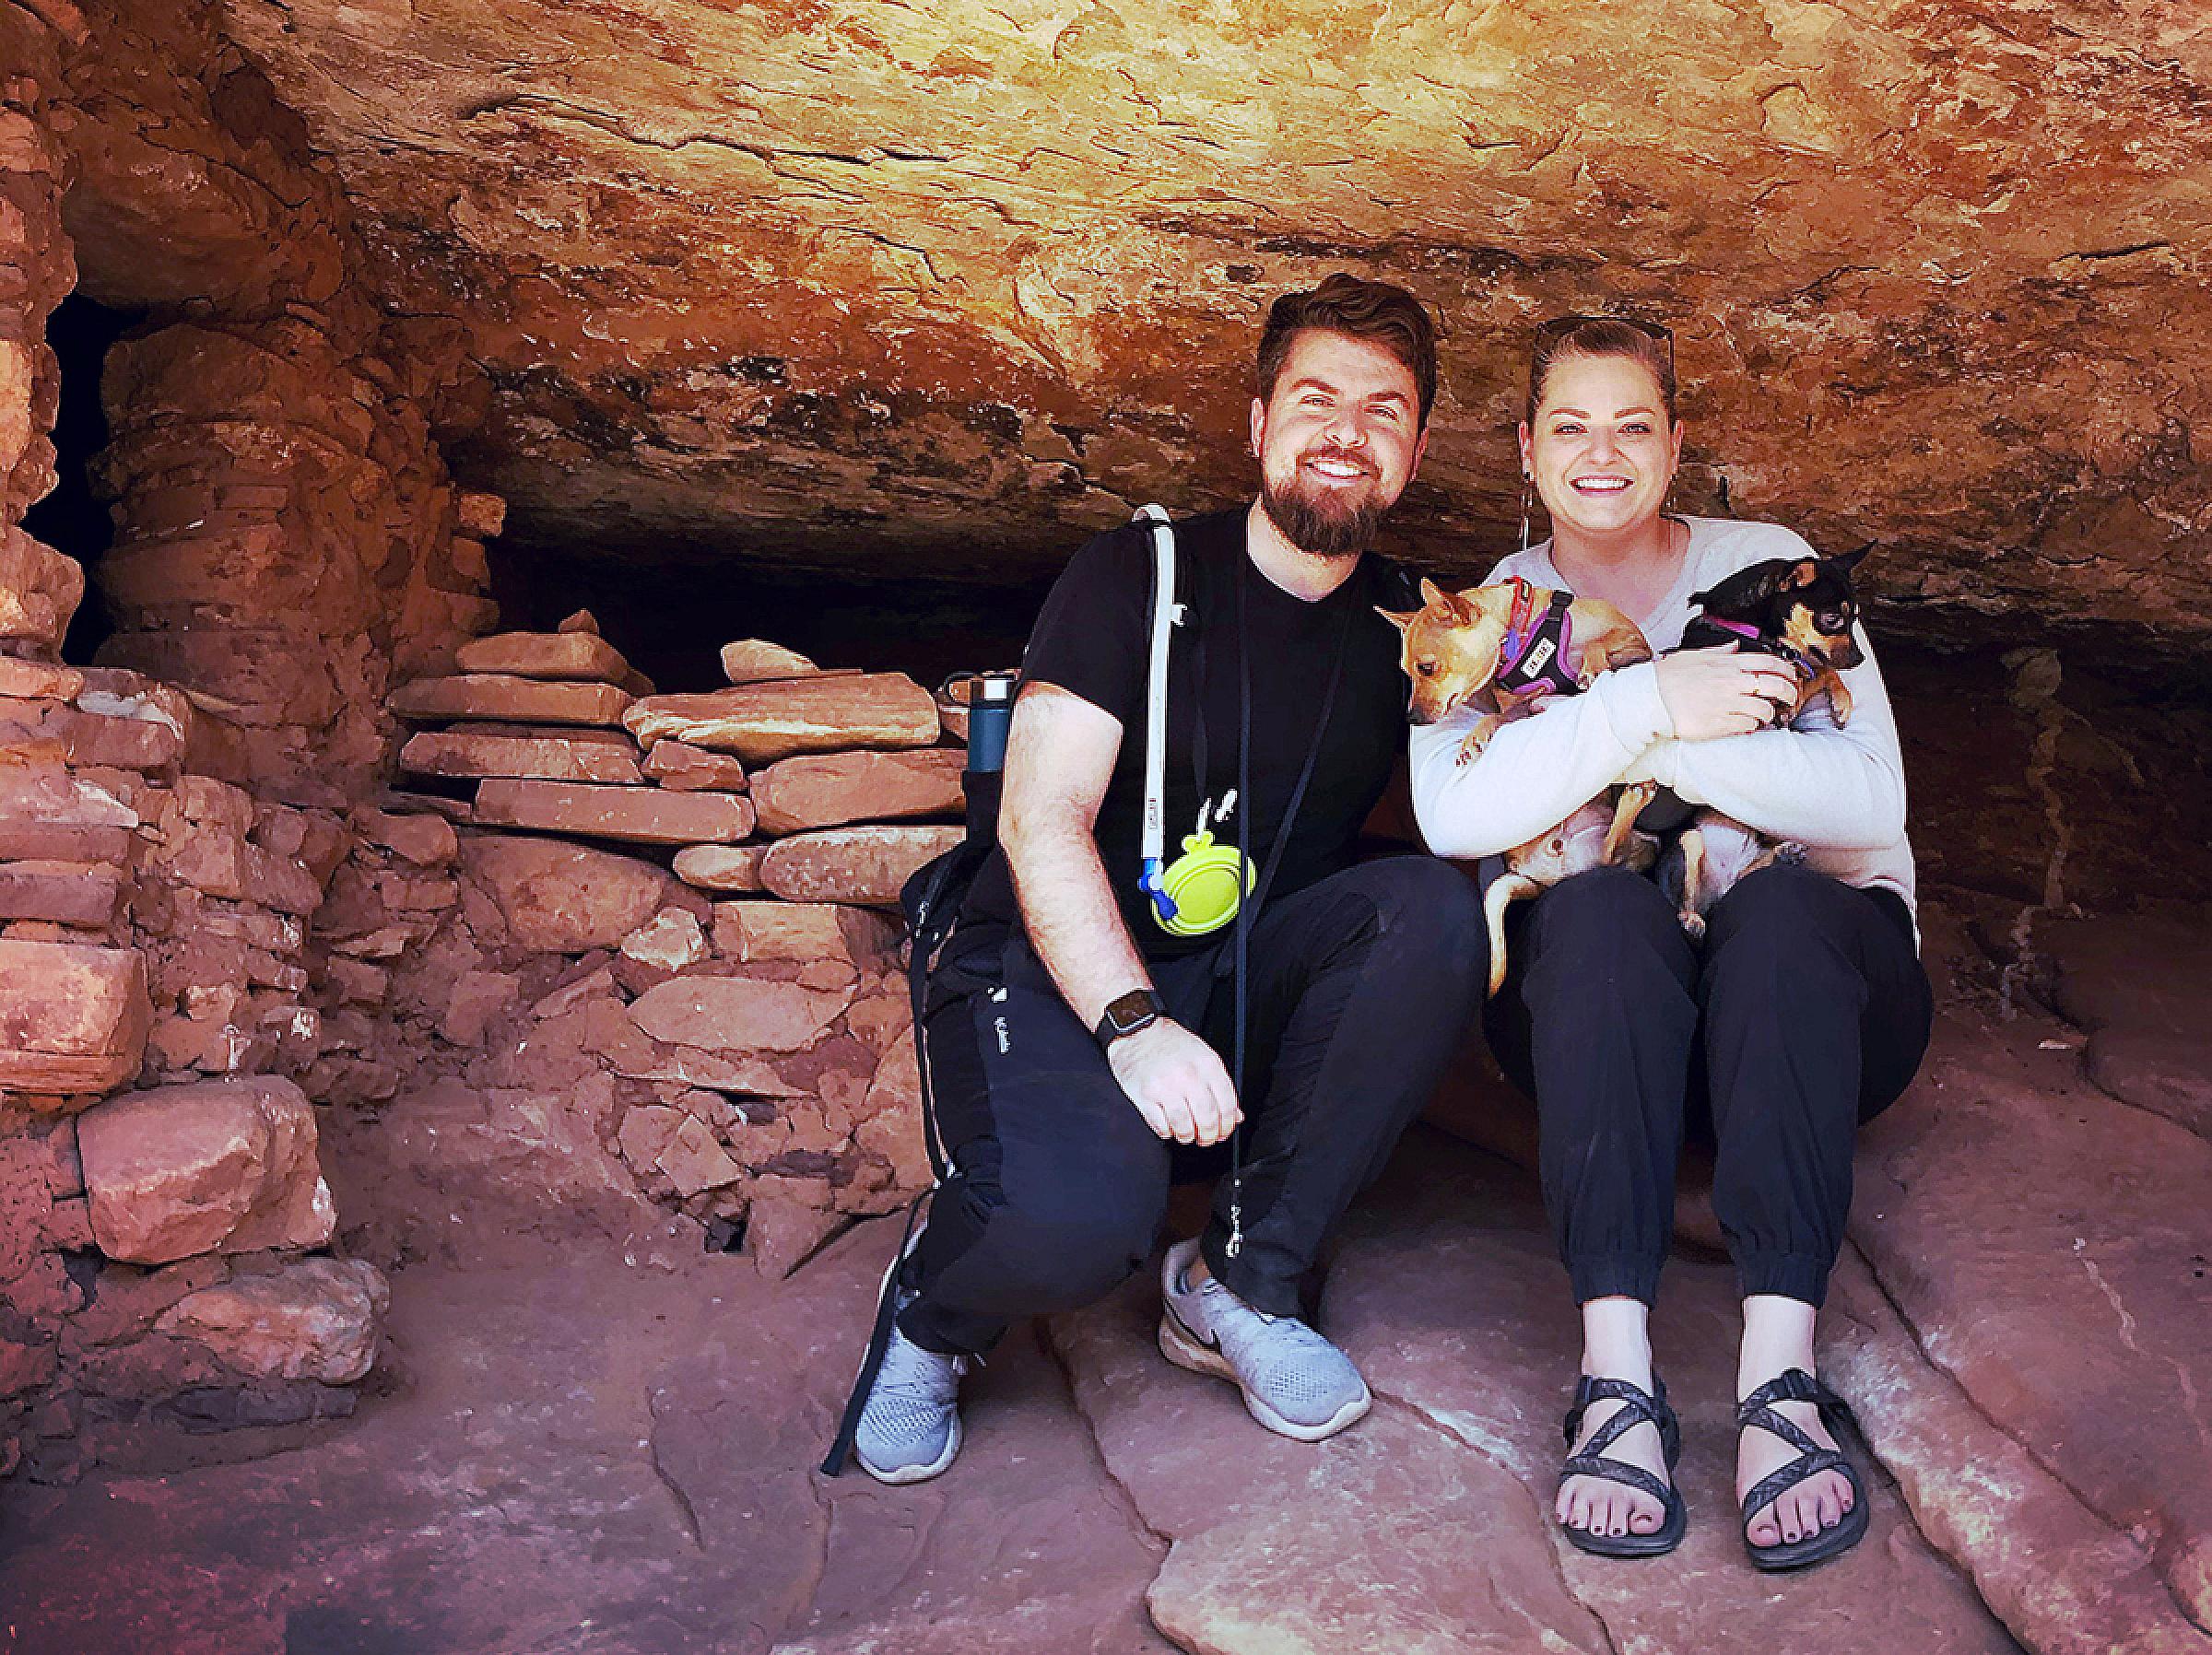 David and Shelli sitting near a structure in a cave and holding their dogs